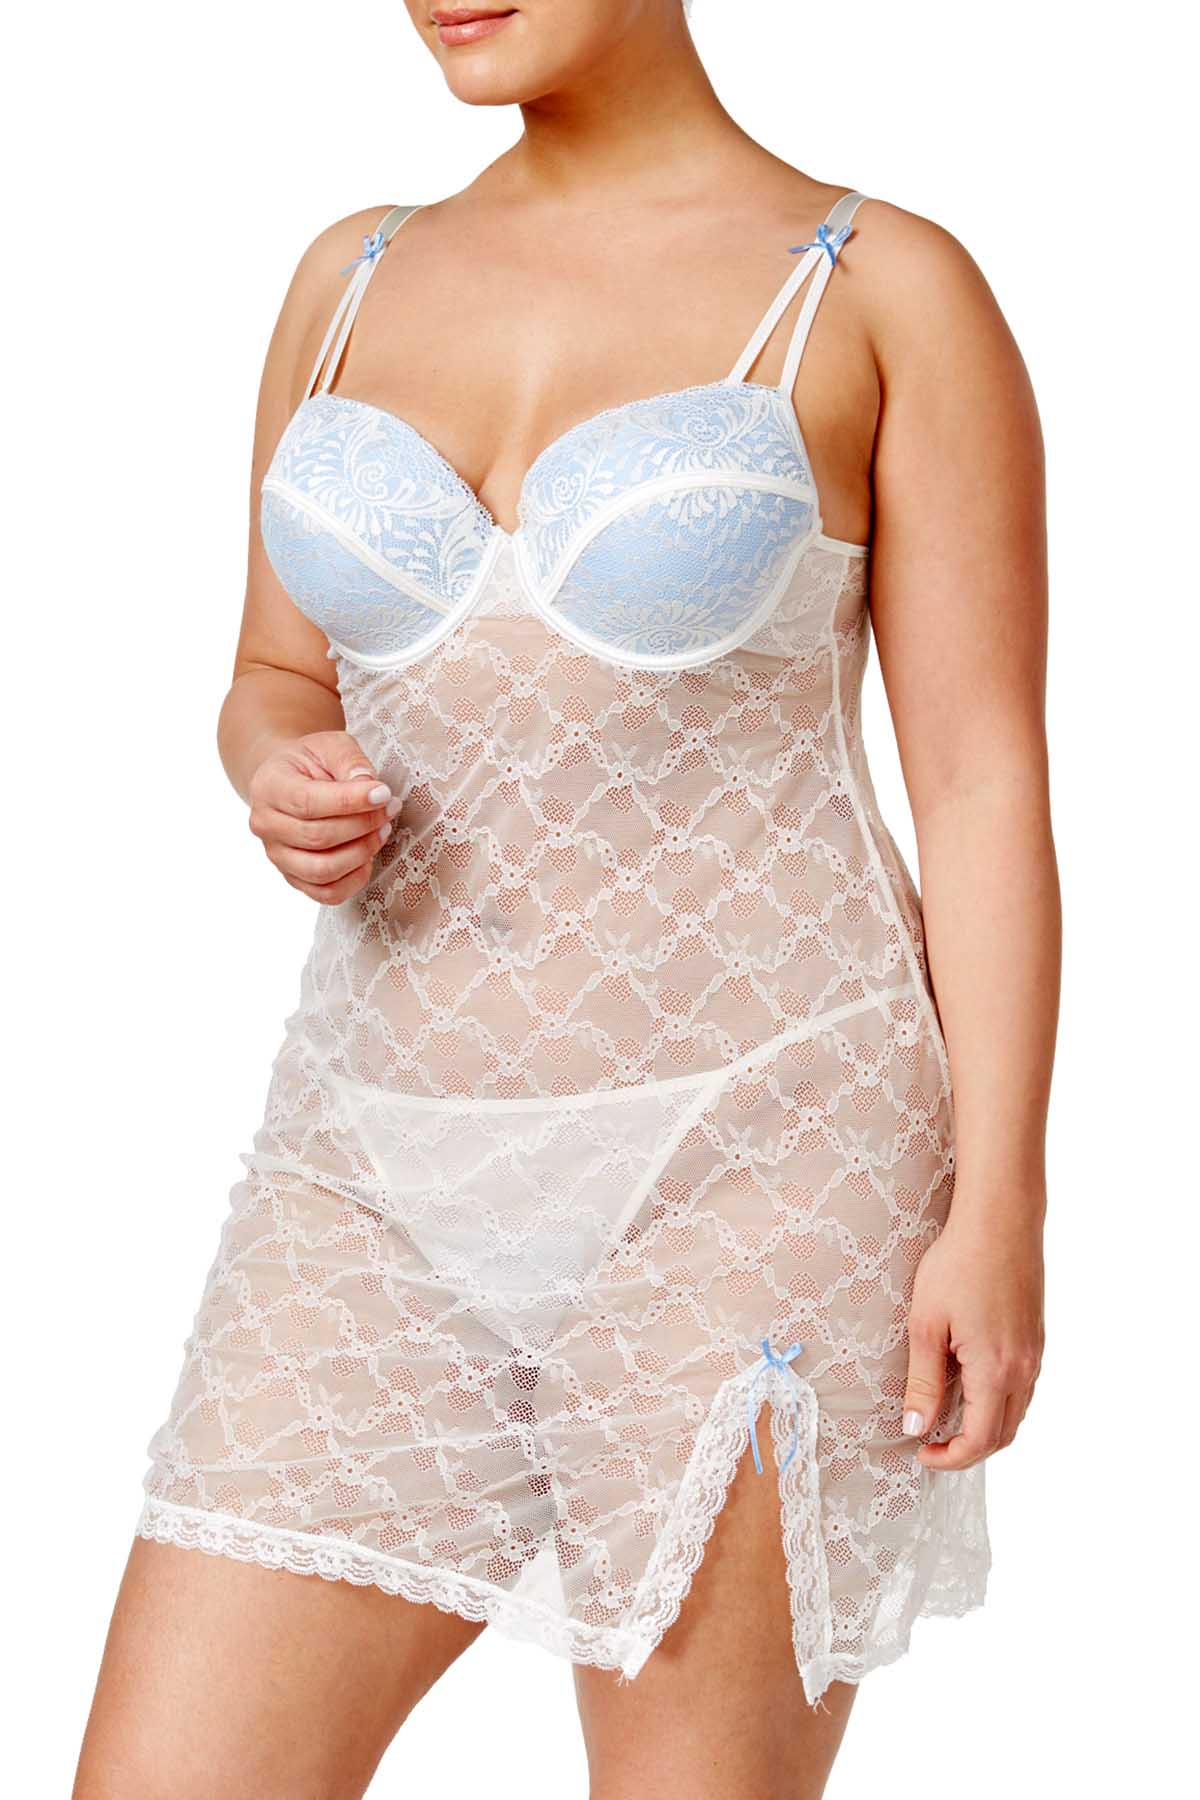 Inspire Psych Terry PLUS White/Bluebell Sheer Lace Chemise And Thong 2pc Set